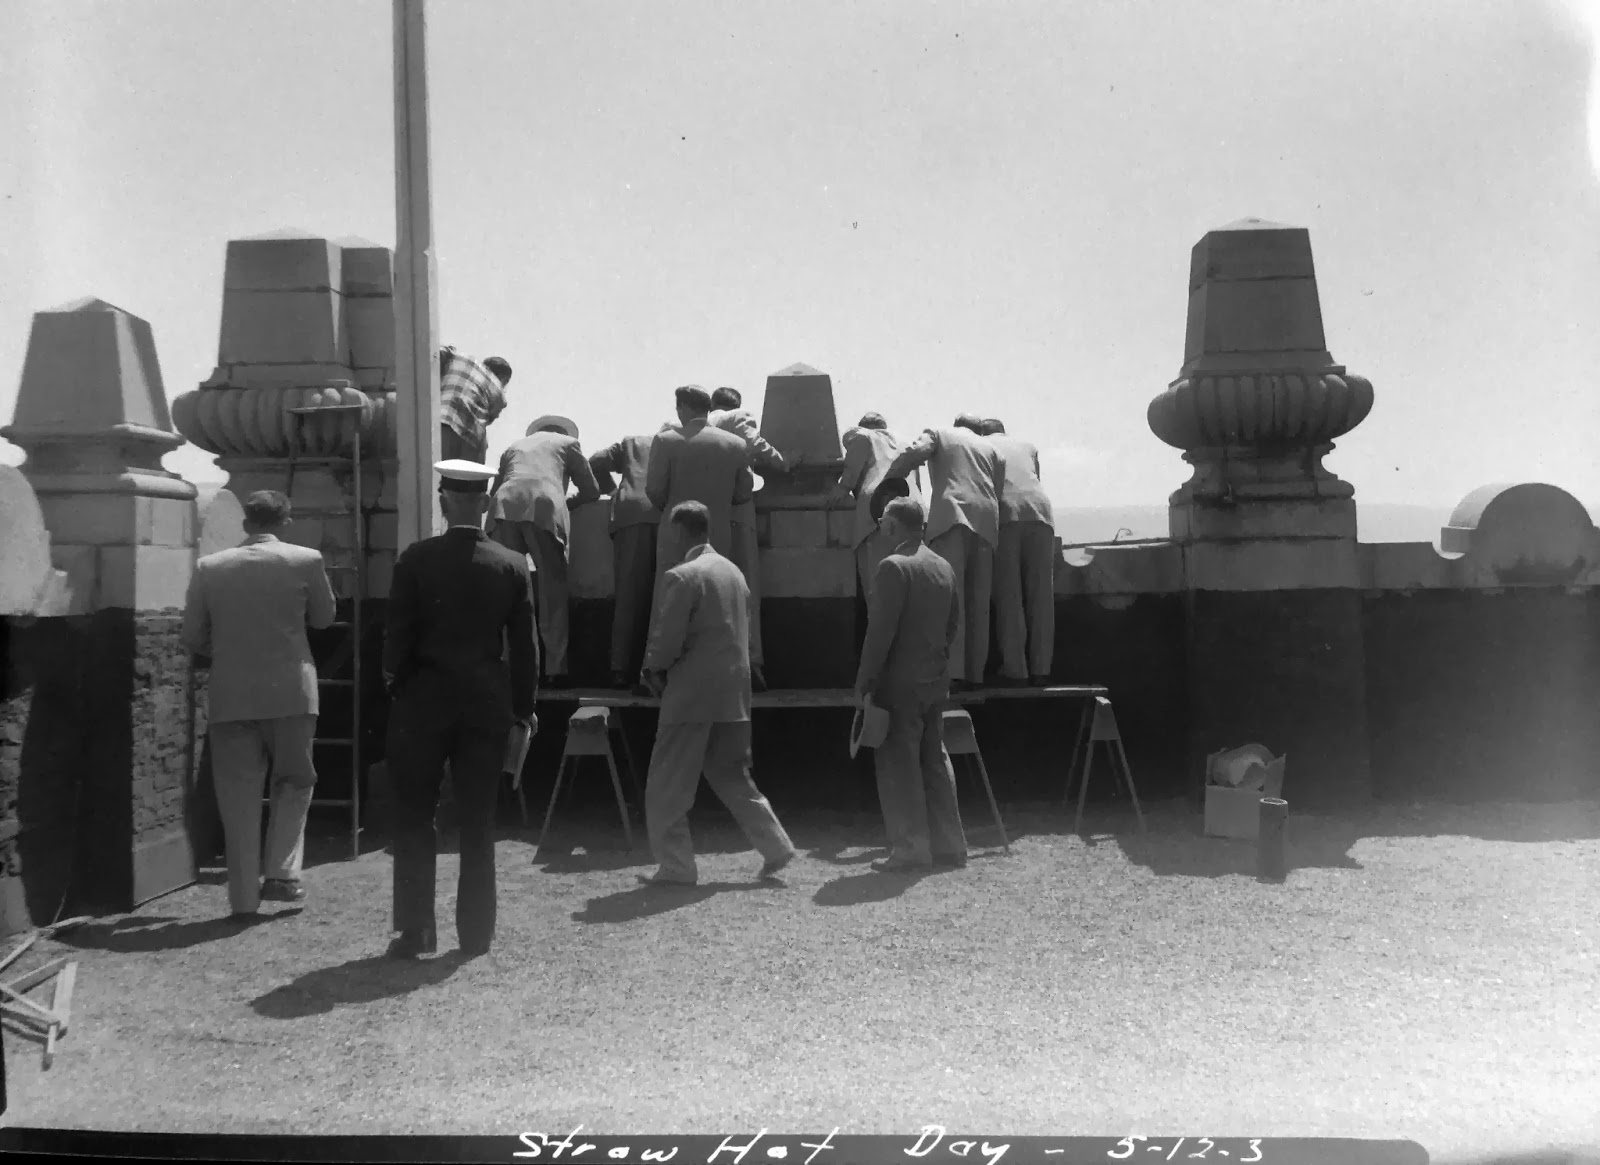 Straw Hat Day toss from top of Whitman Hotel, May 1953 (3).JPG